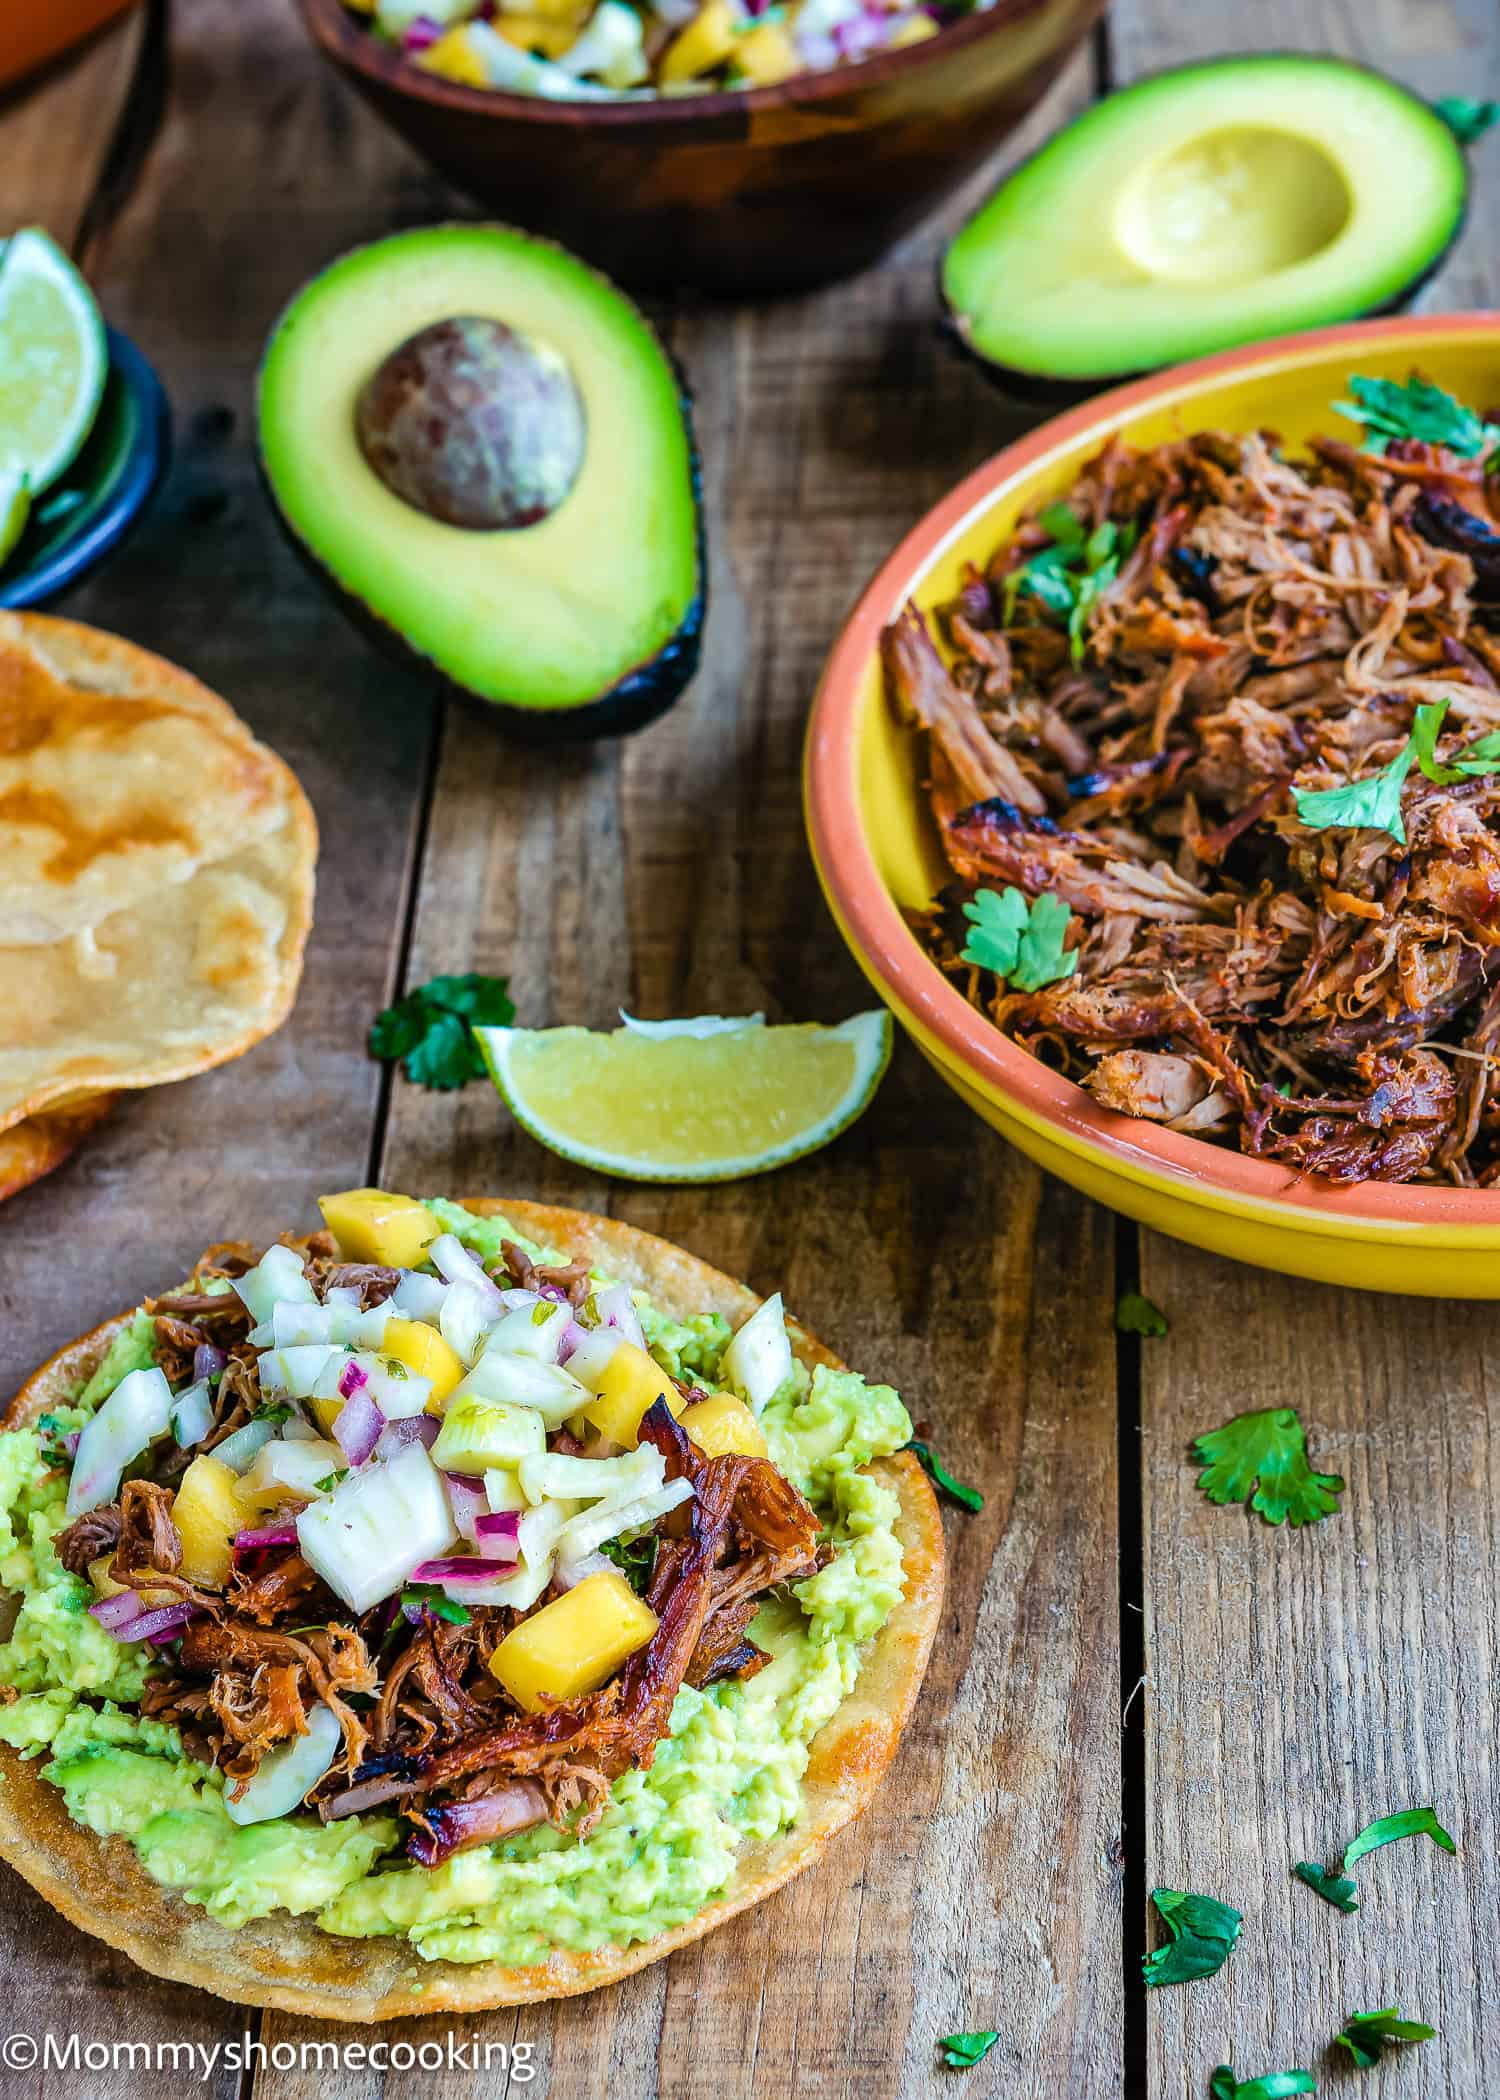 A Slow-Cooker Spicy Pork Carnitas tostada with mango salsa over a wooden surface. i